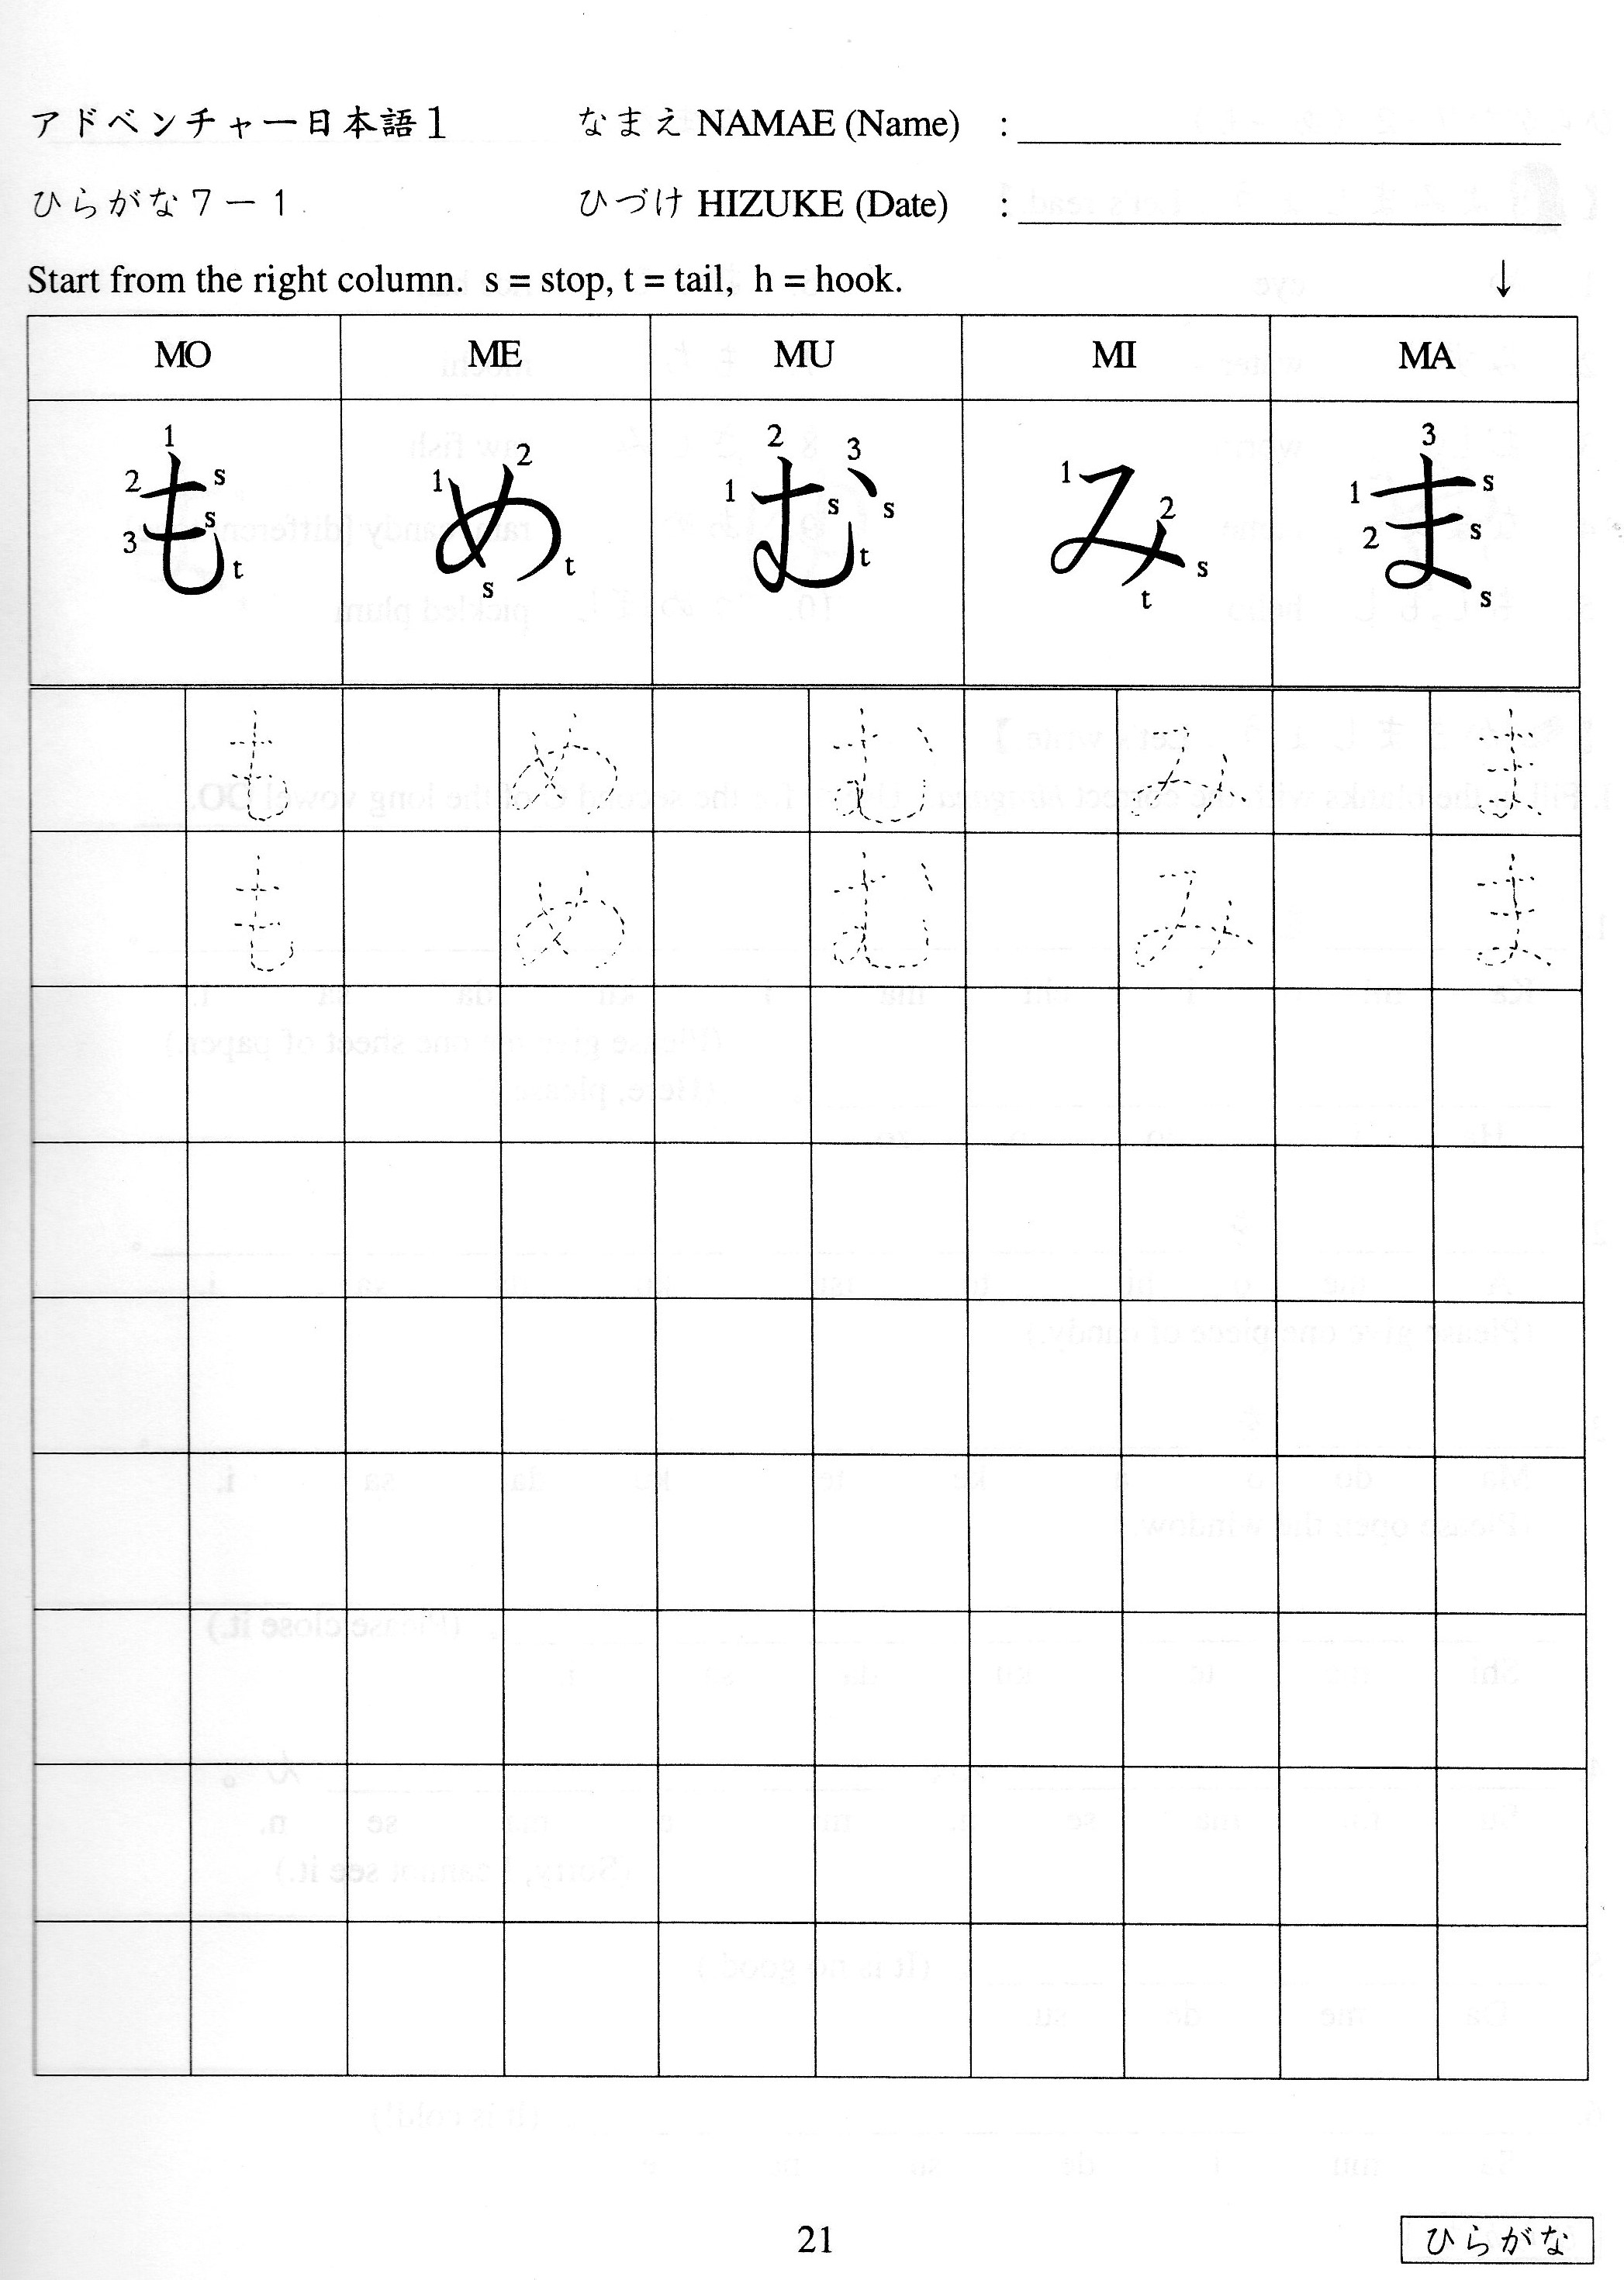 finished my homework in japanese